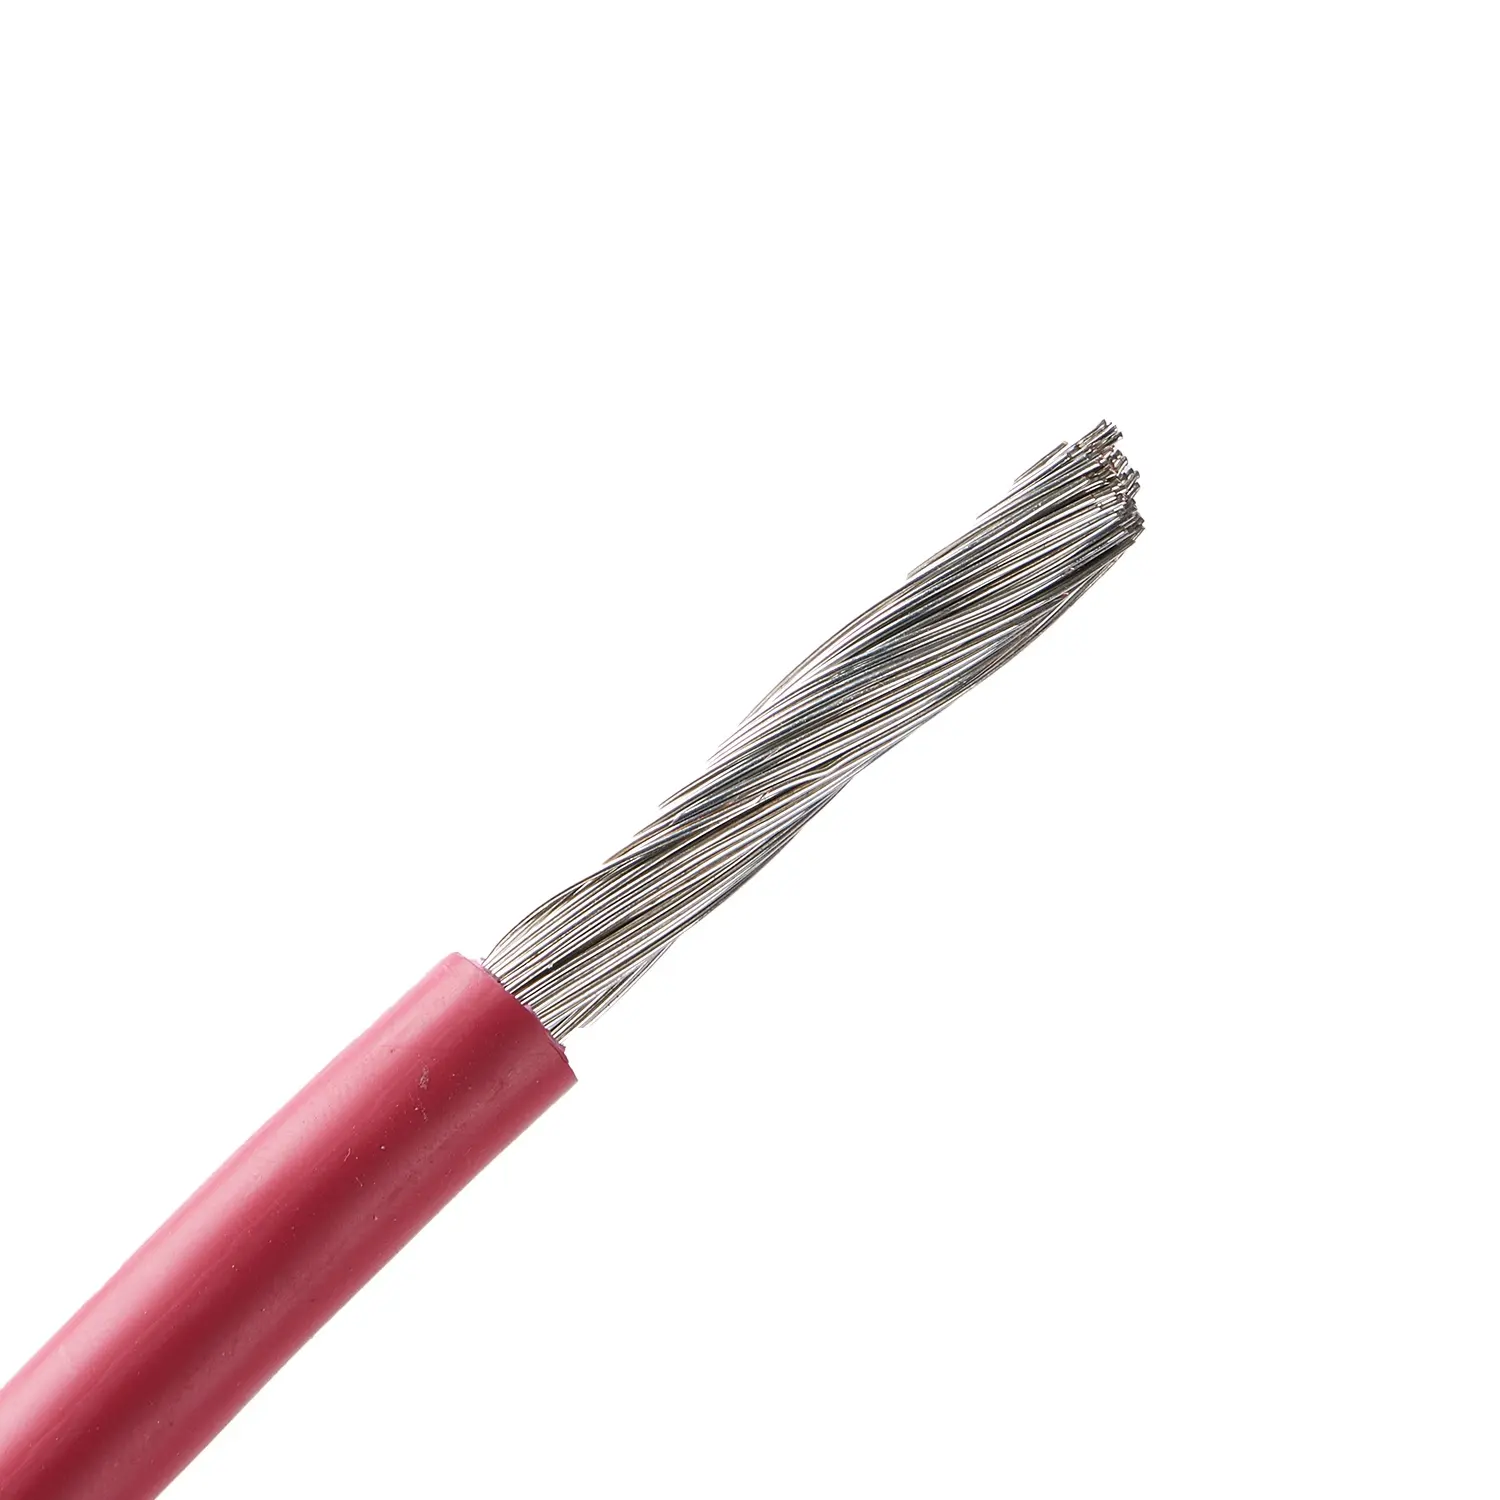 Dingzun Tinned Copper / Copper conductor Cable JYJ125 XLPE Flame Retardant Motor Winding Lead Wire Price For Lighting